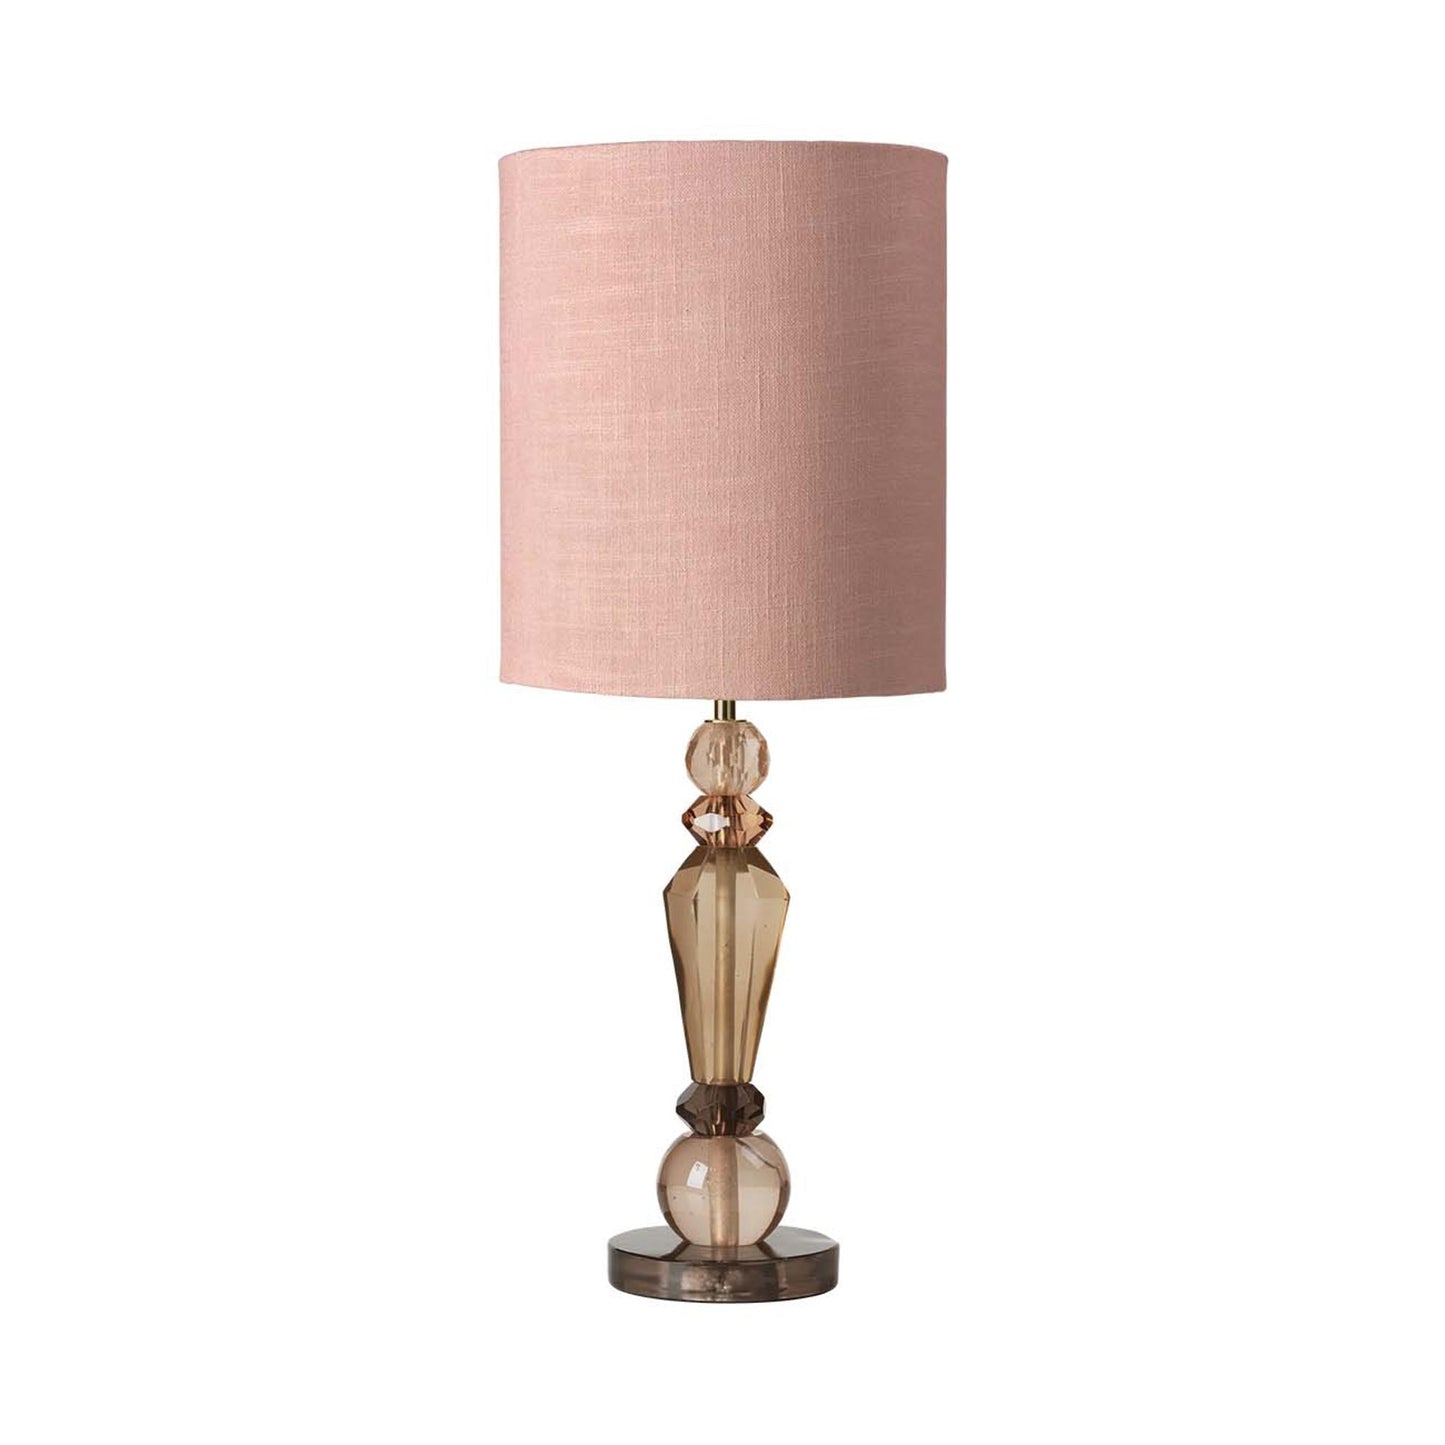 Caia Table Lamp by Cozy Living #Nougat/Dusty Rose